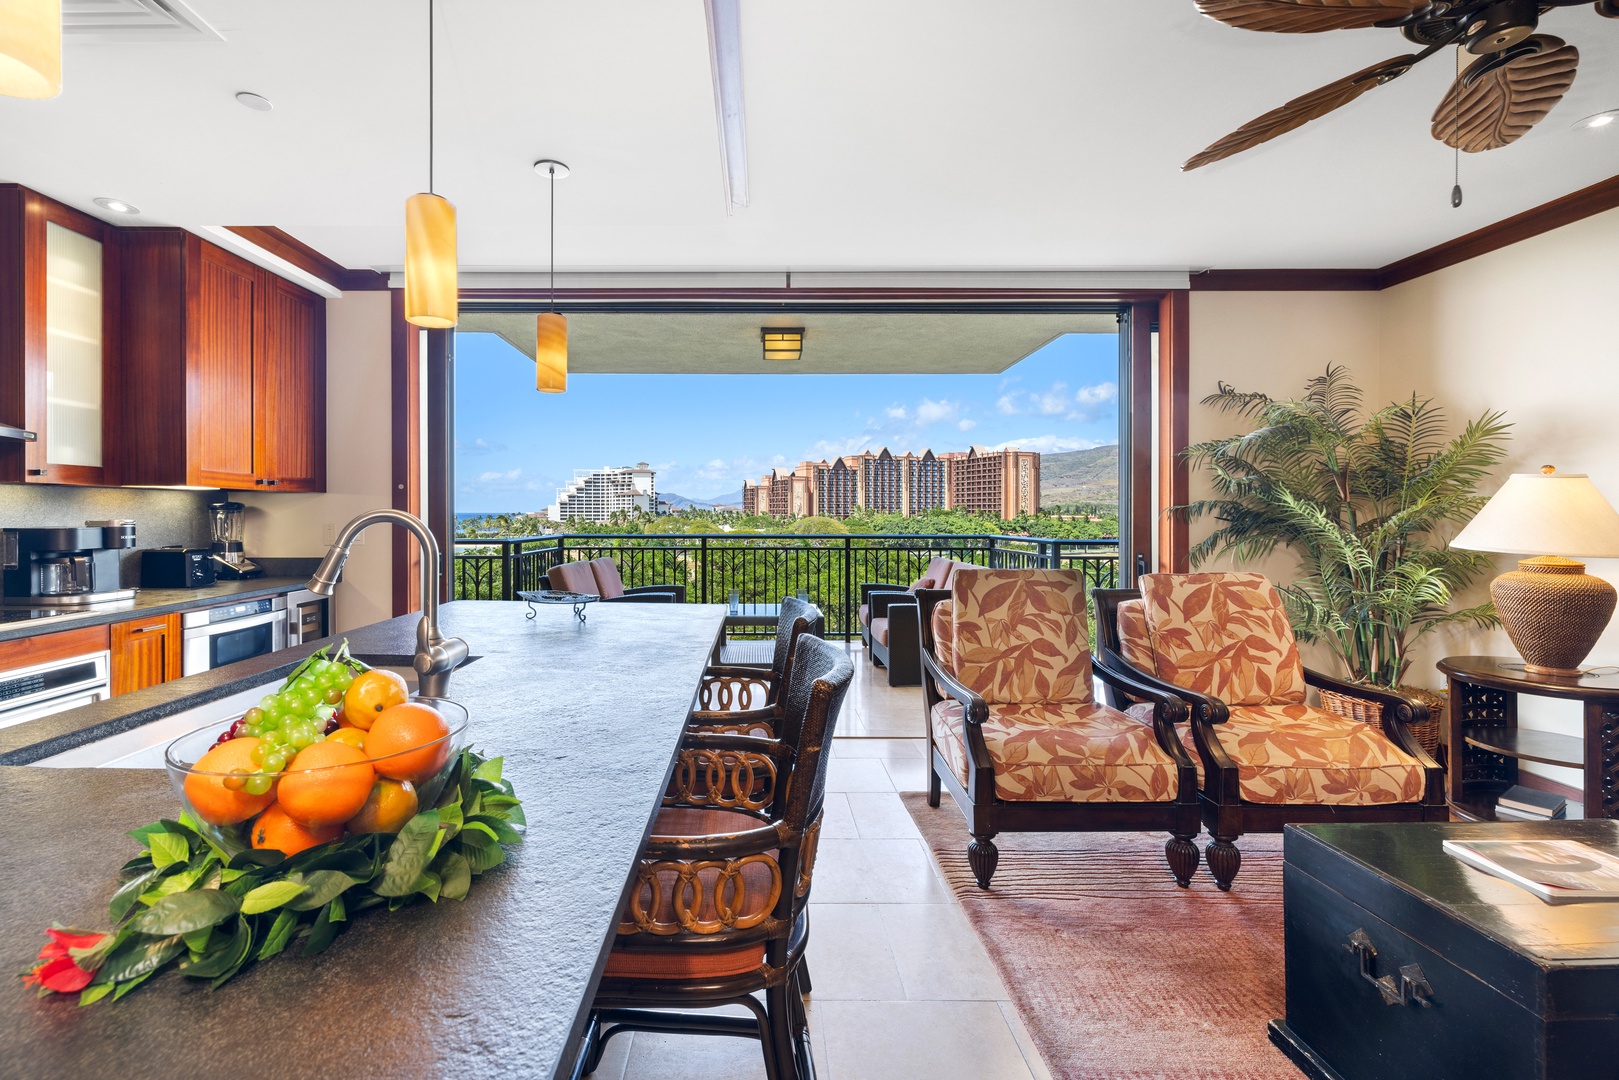 Kapolei Vacation Rentals, Ko Olina Beach Villas B602 - Open concept floorplan with a seamless blend of living, dining, and kitchen areas, giving you a spacious yet connected space.